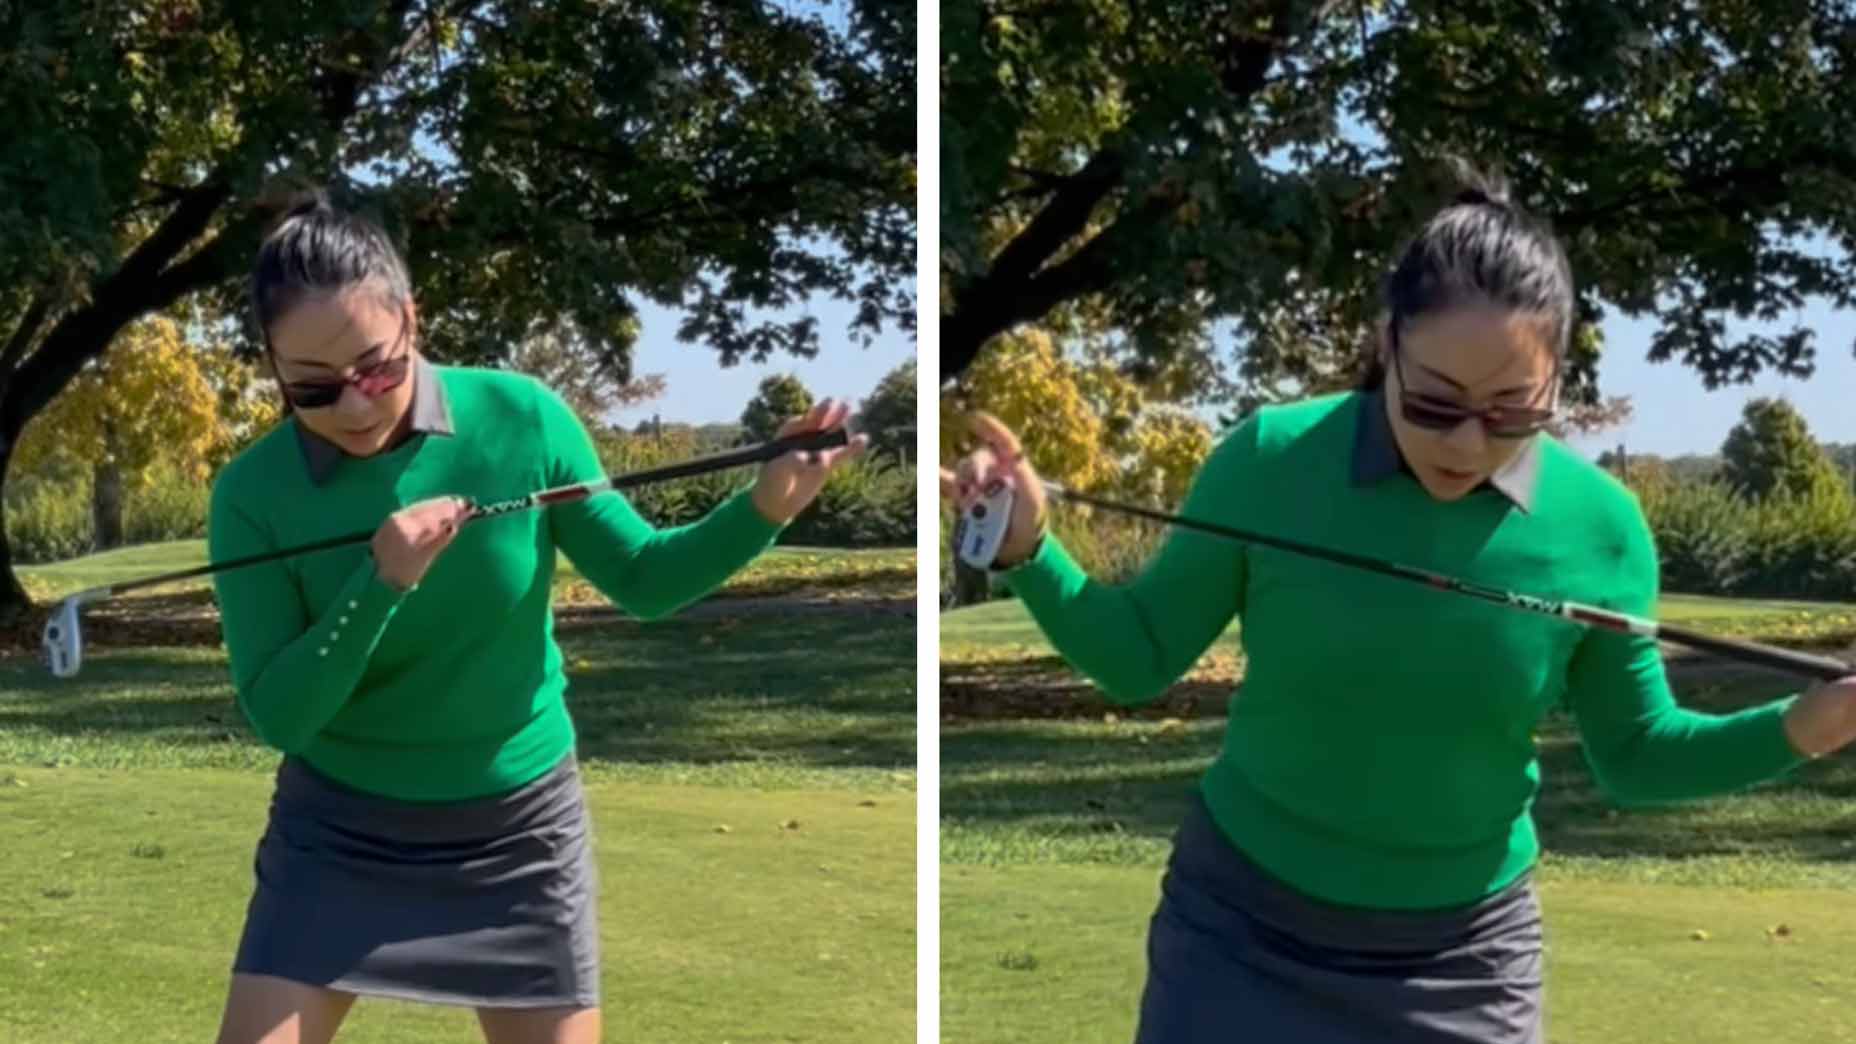 Wondering how to hit a downhill lie with perfection? Cathy Kim explains a common mistake amateurs make, and gives tips to fix the issue